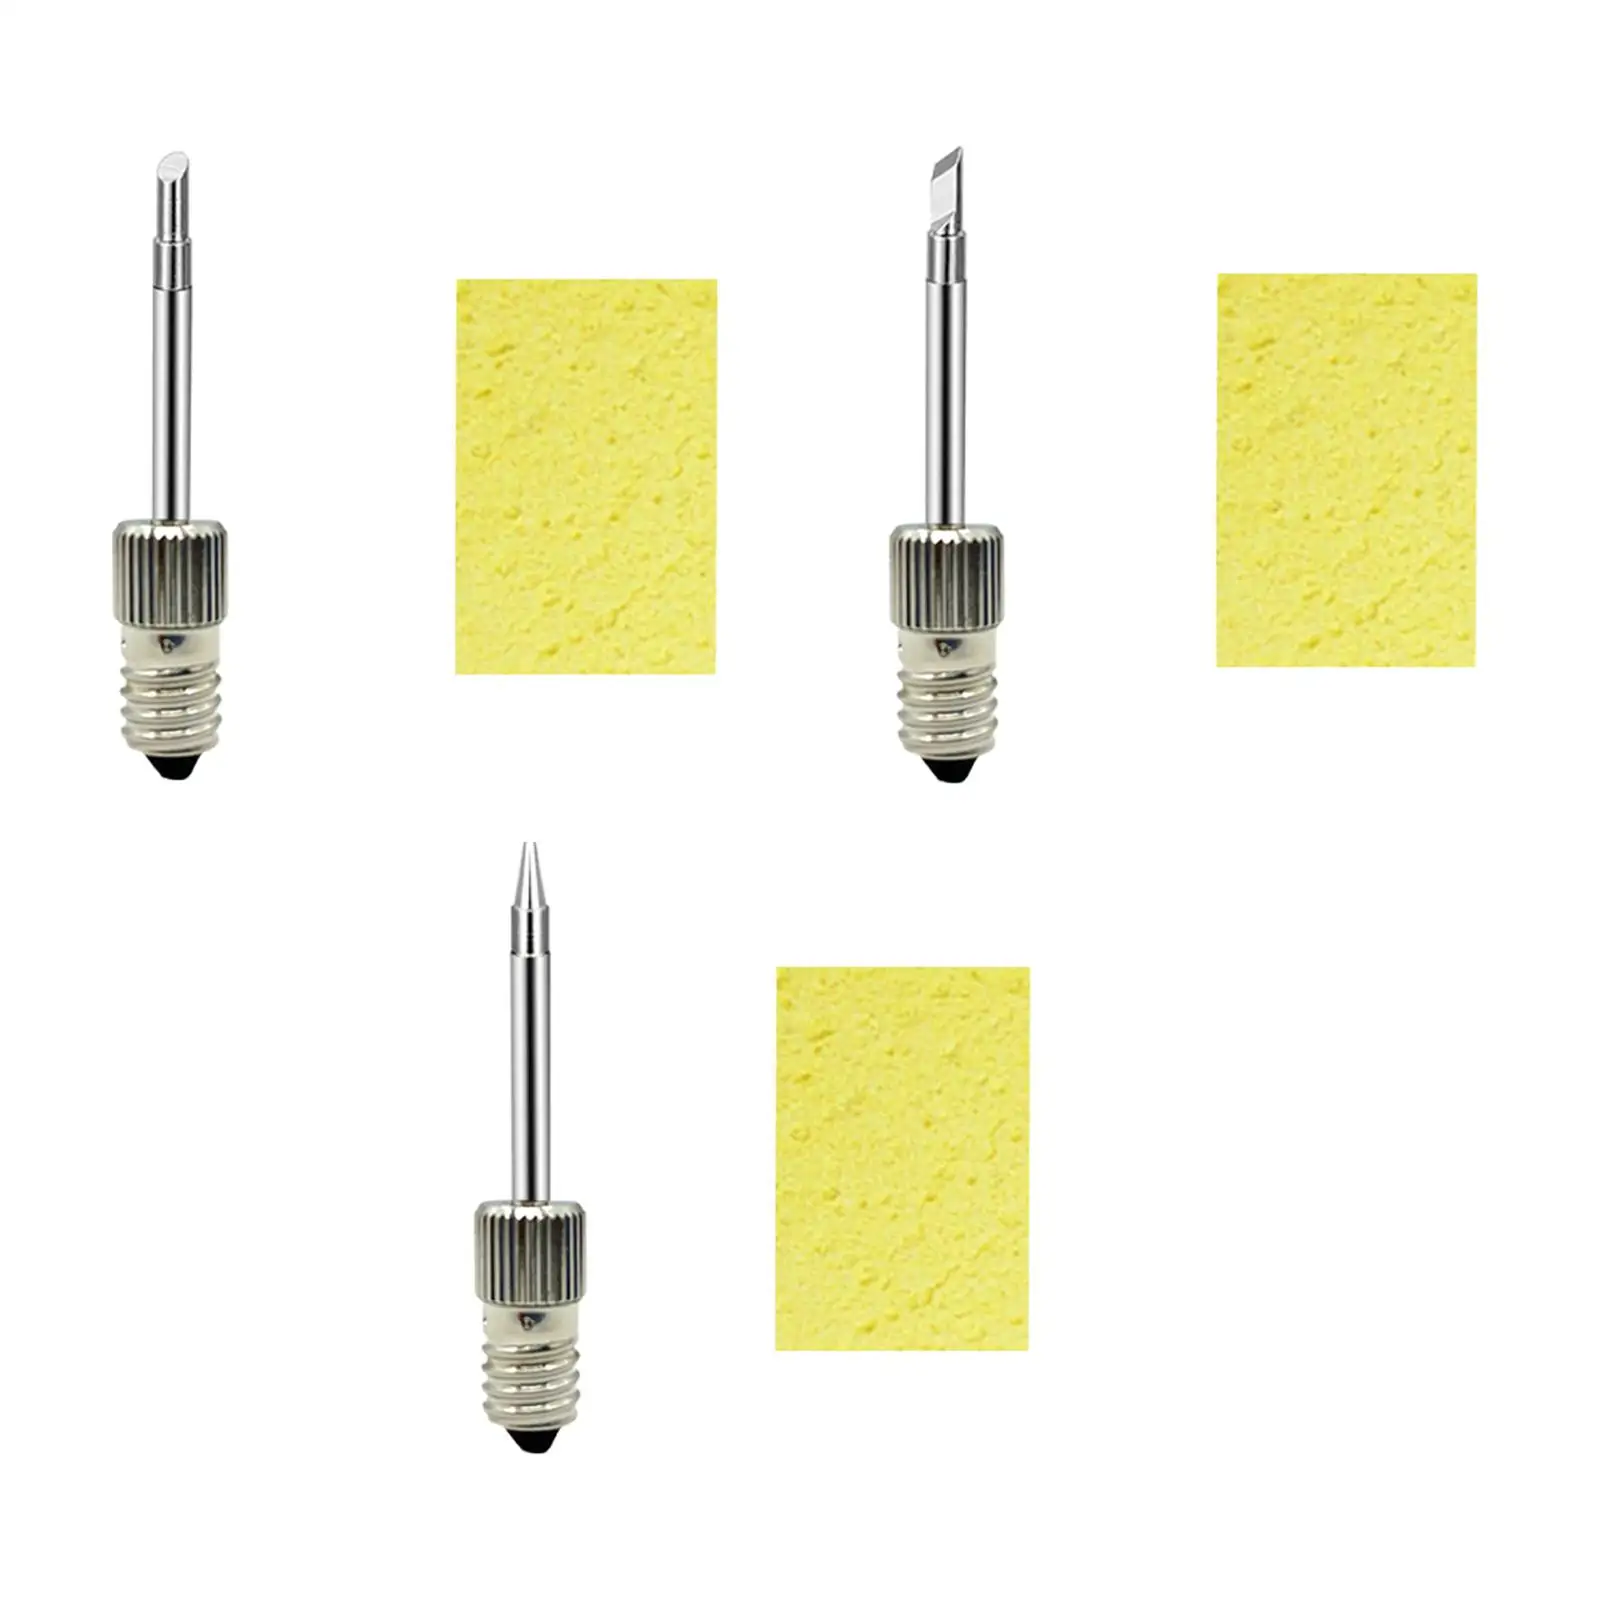 Soldering Tips Threaded Soldering Iron Head Replacement for E10 Interface